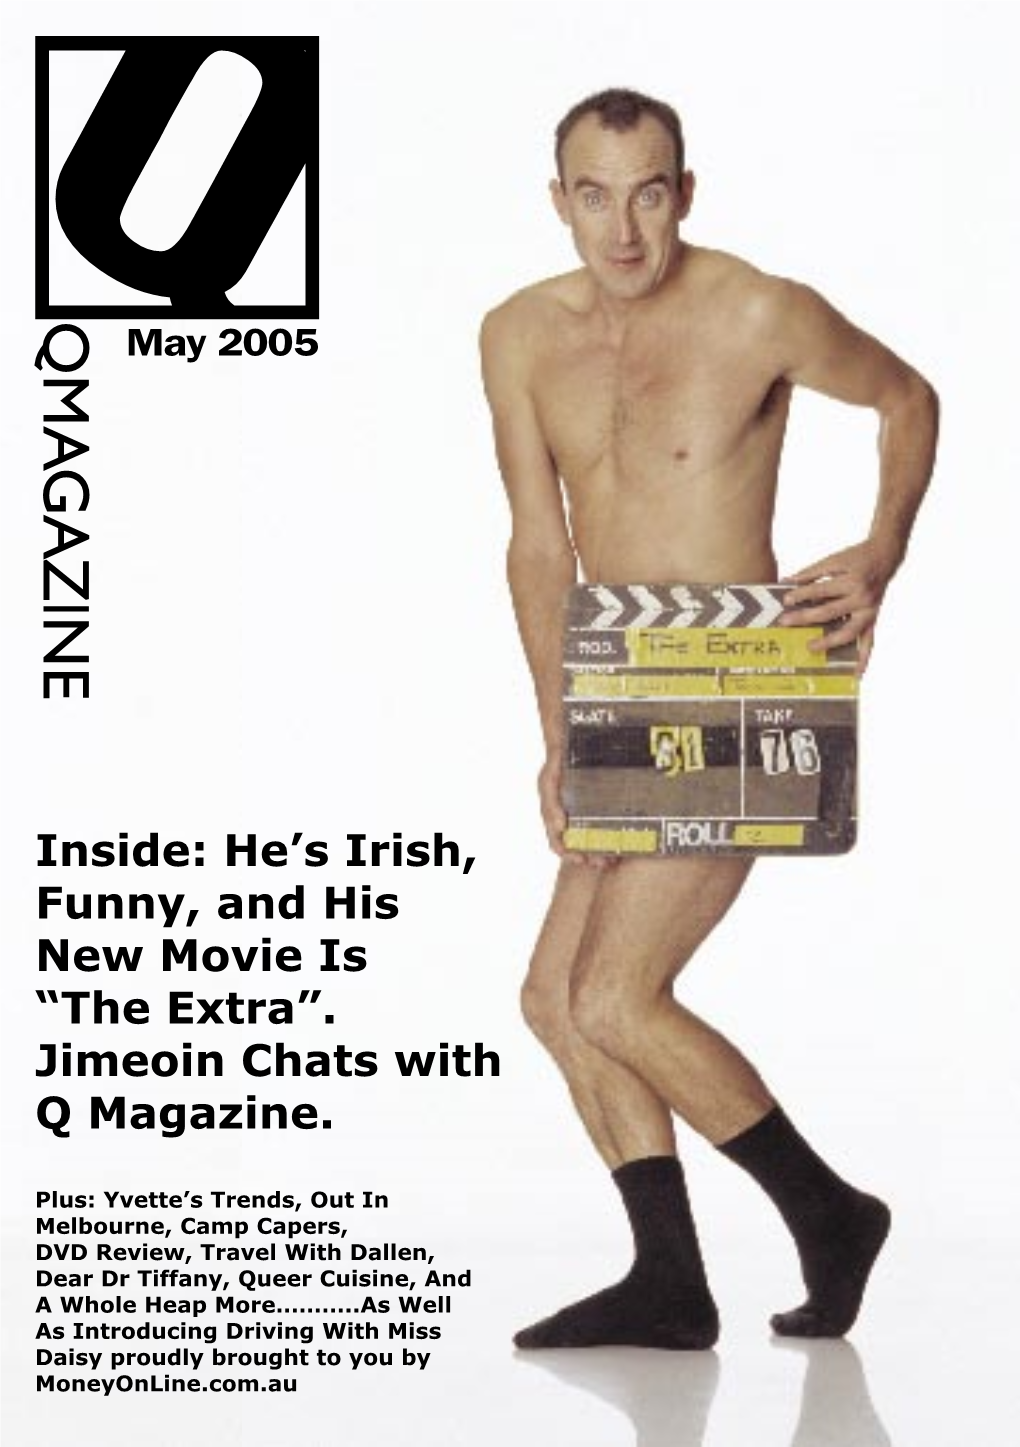 Inside: He's Irish, Funny, and His New Movie Is “The Extra”. Jimeoin Chats with Q Magazine